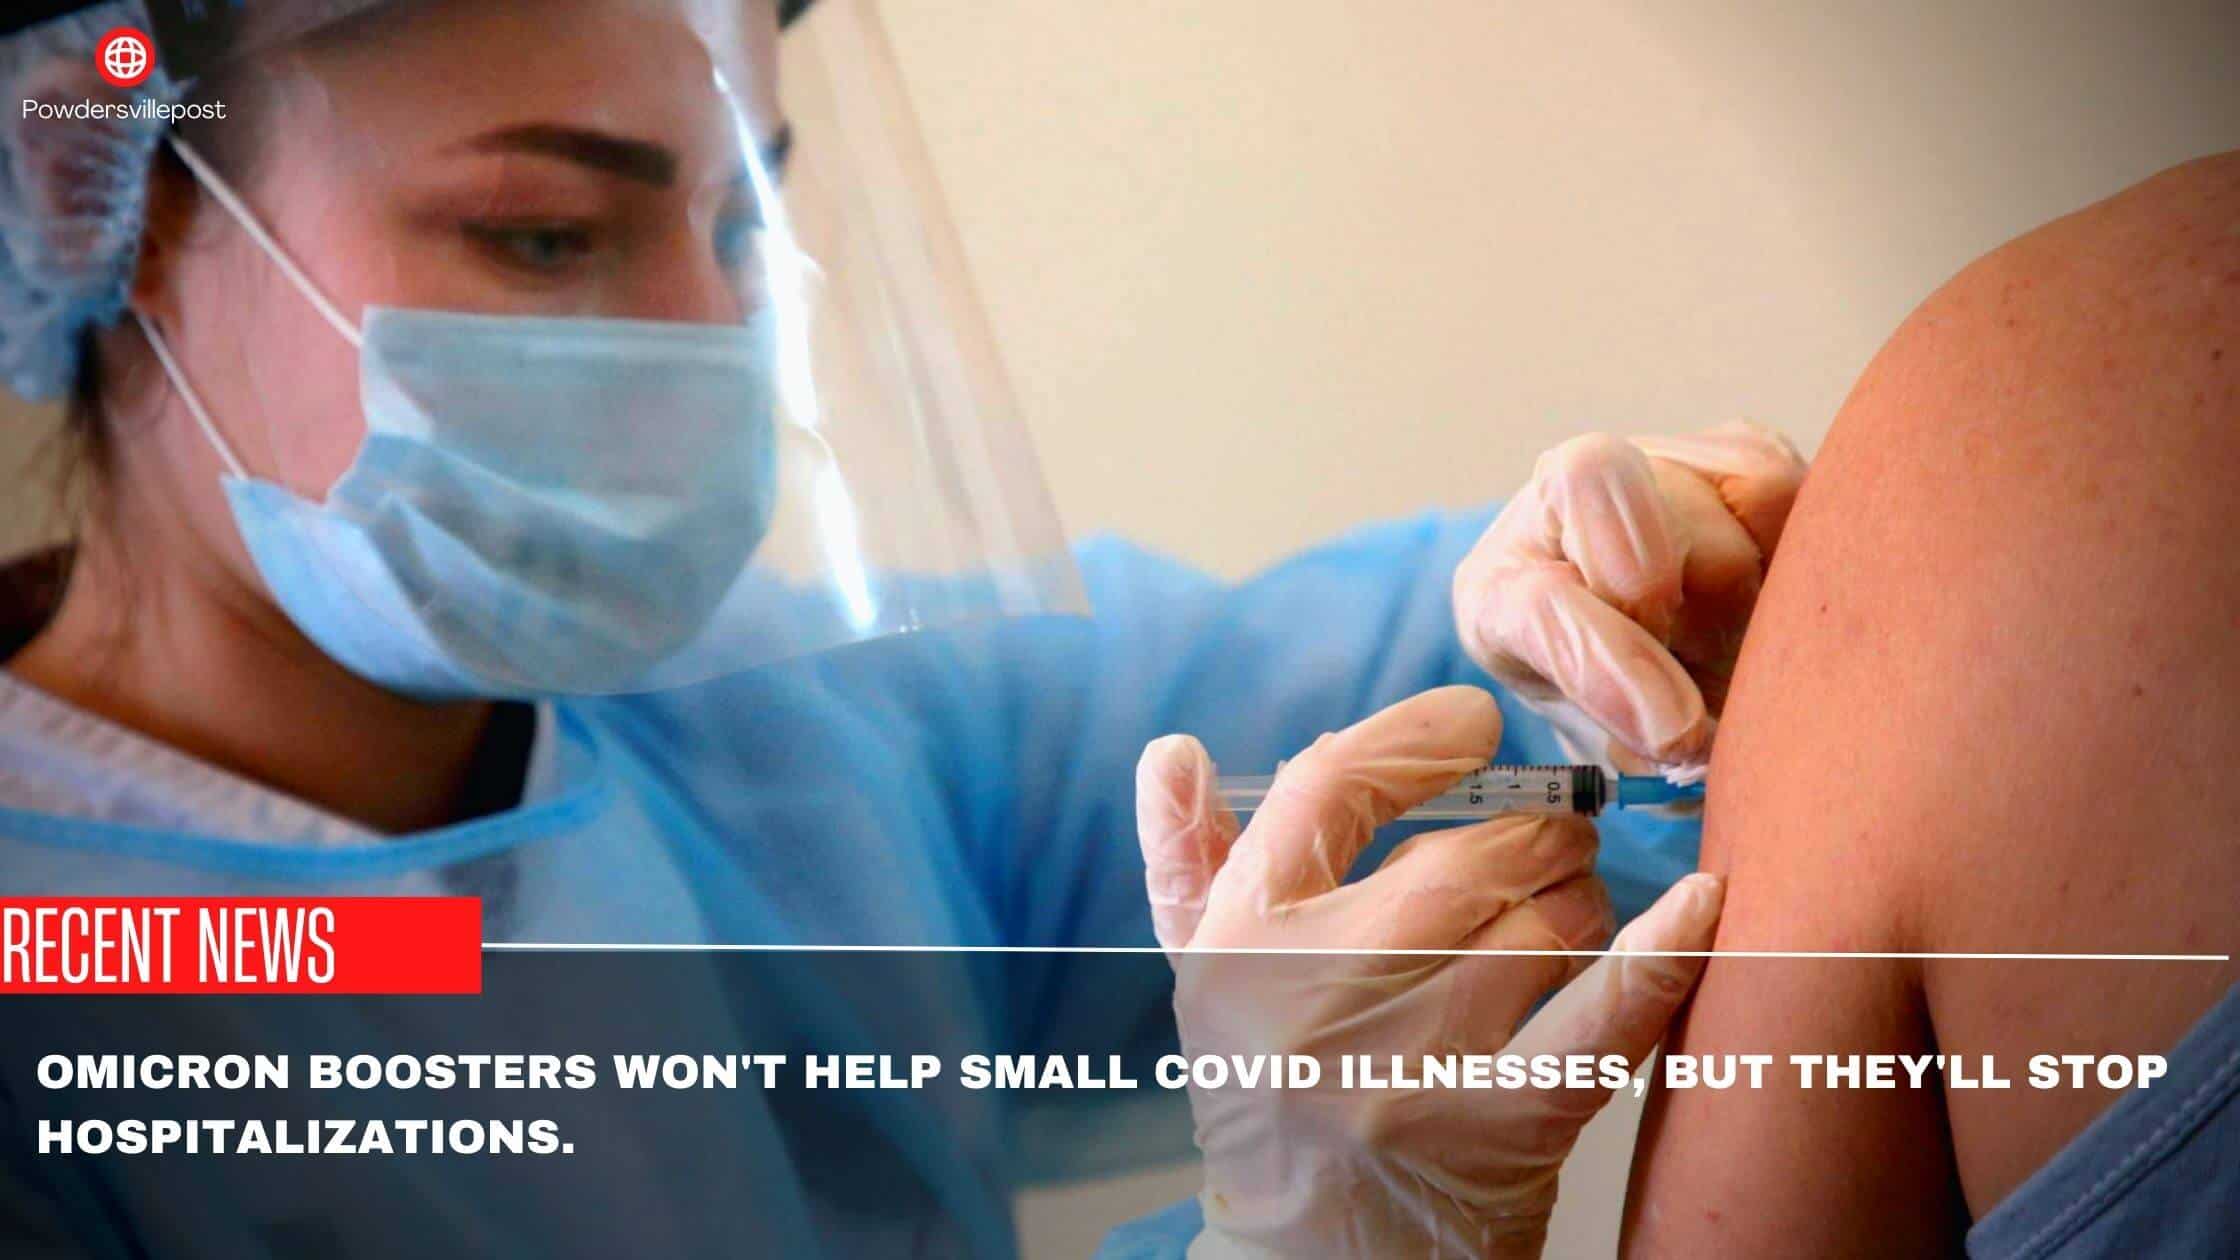 Omicron Boosters Won't Help Small Covid Illnesses, But They'll Stop Hospitalizations.